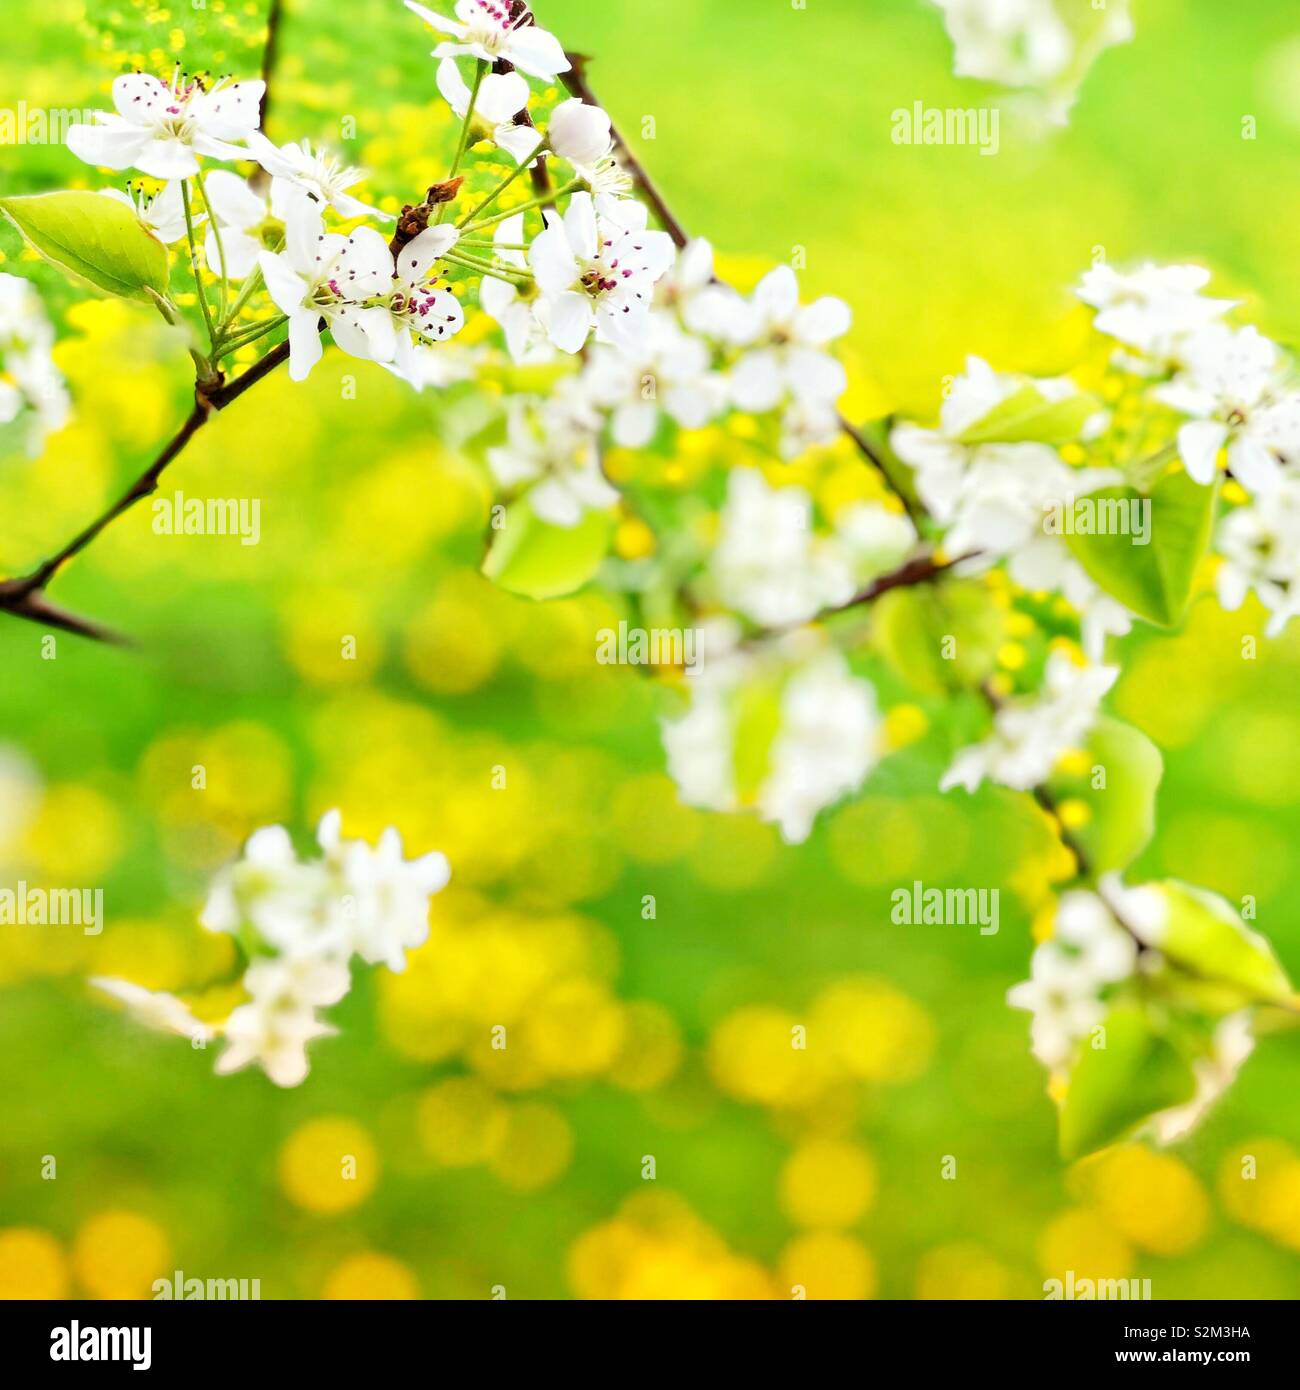 A dreamy feeling image of white flowers with a field of yellow flowers in the background Stock Photo